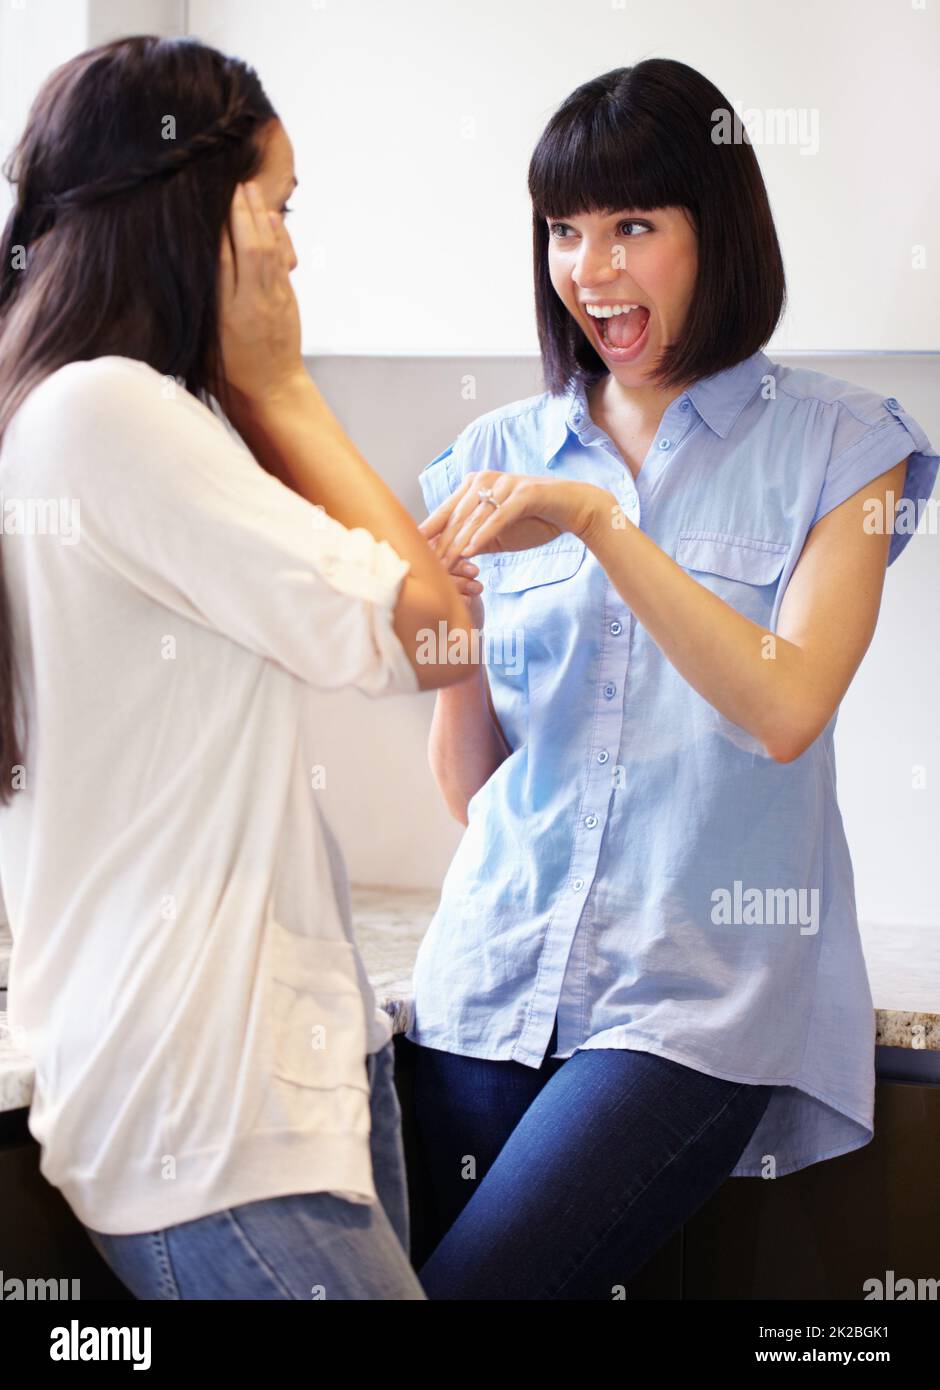 I said yes. An excited young woman showing her engagement ring to her ecstatic friend. Stock Photo